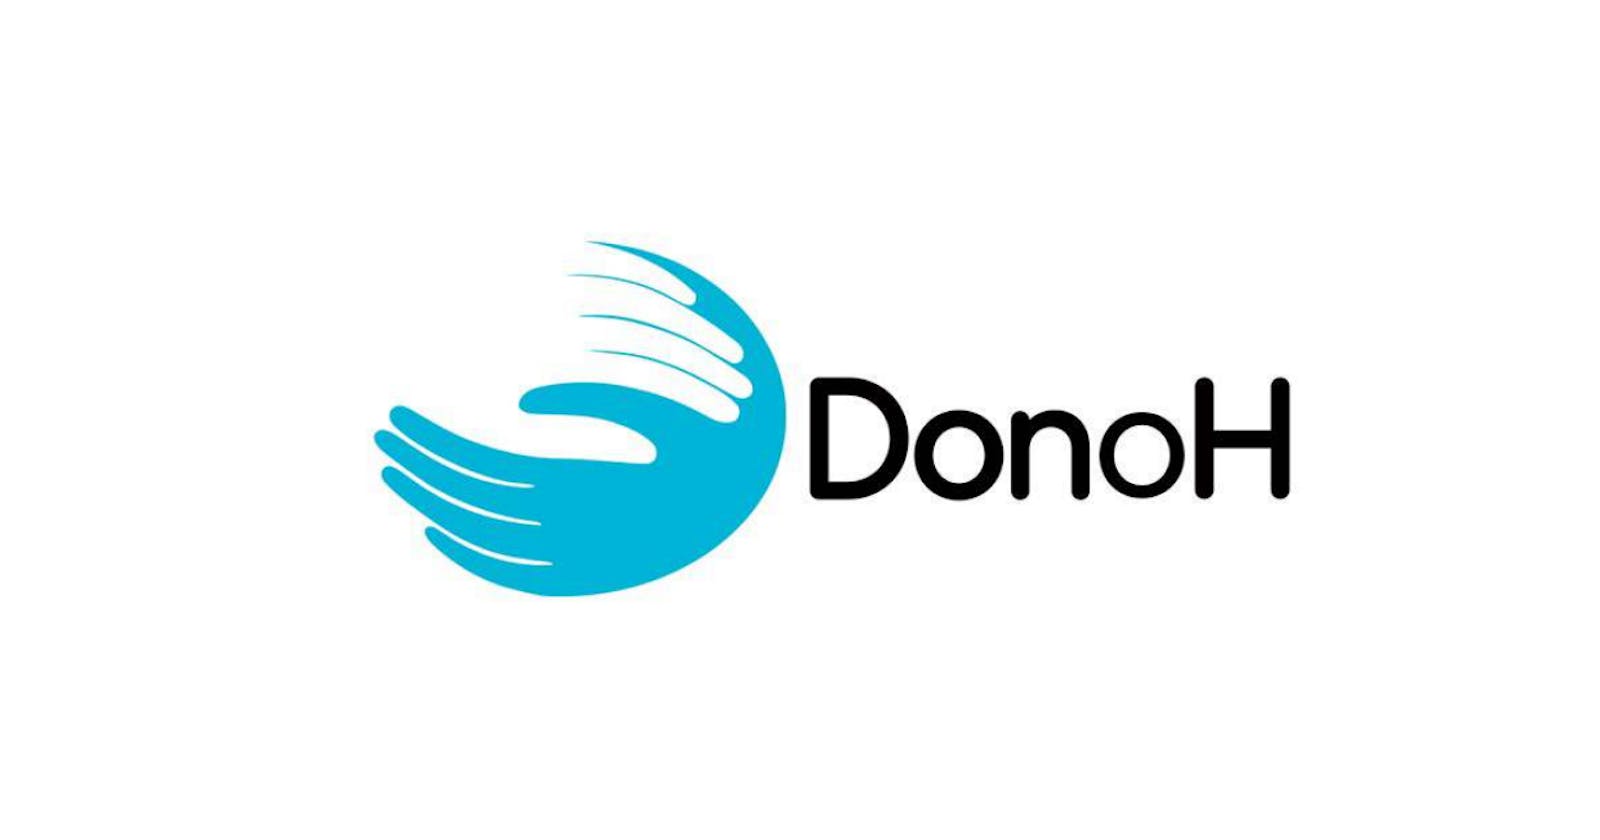 Access to medical aid now feasible with DonoH.